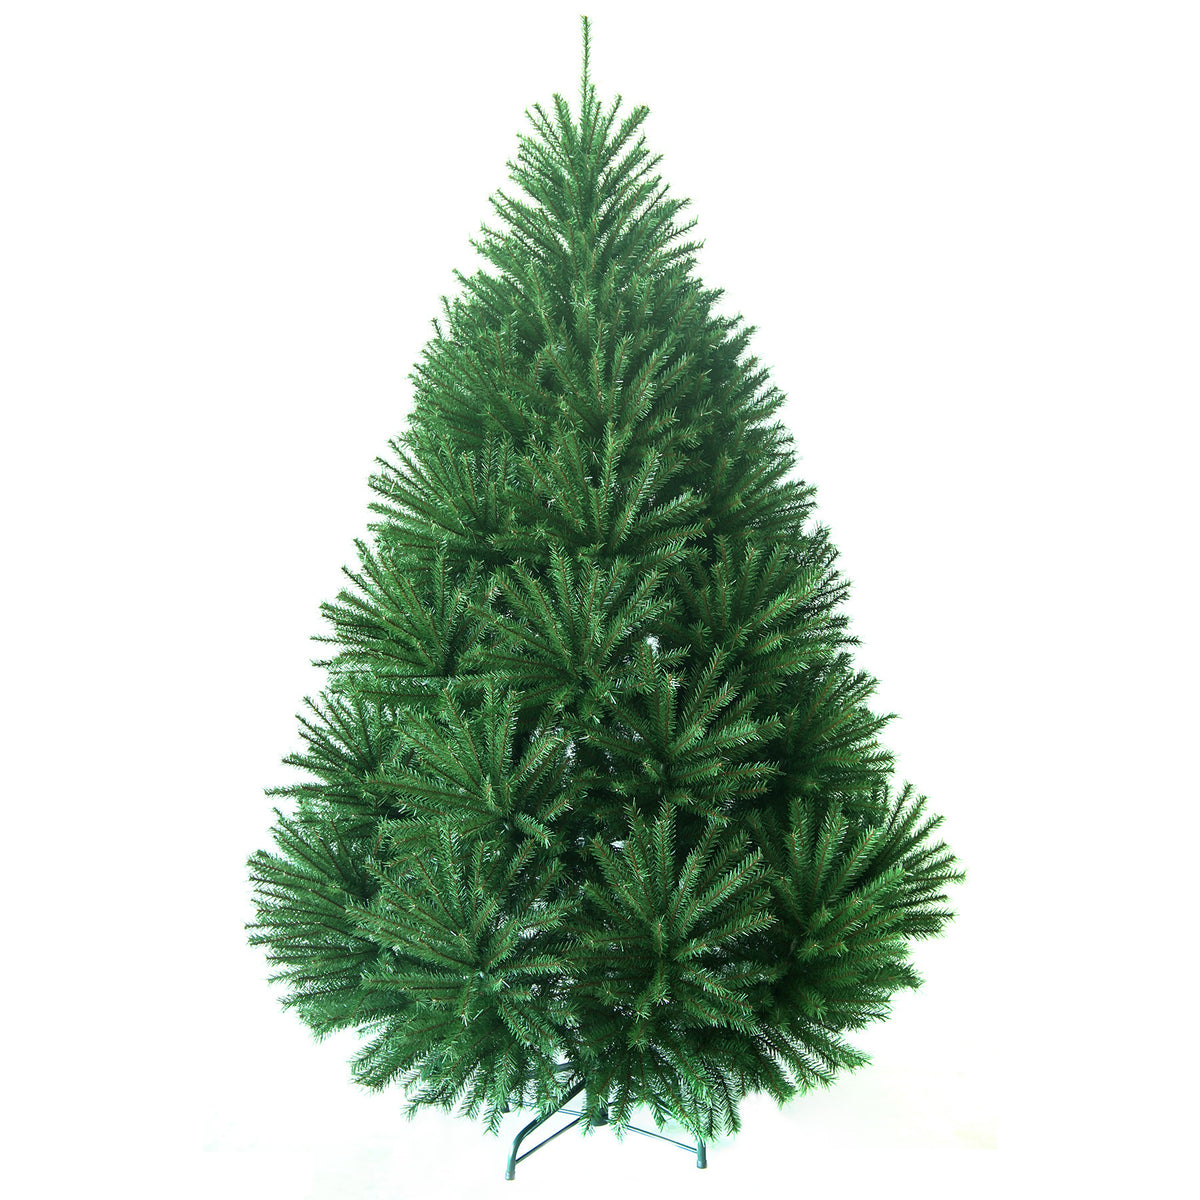 Noma Blenheim Spruce Christmas Tree with 100% PVC tips and Metal Stand-6ft, 7ft